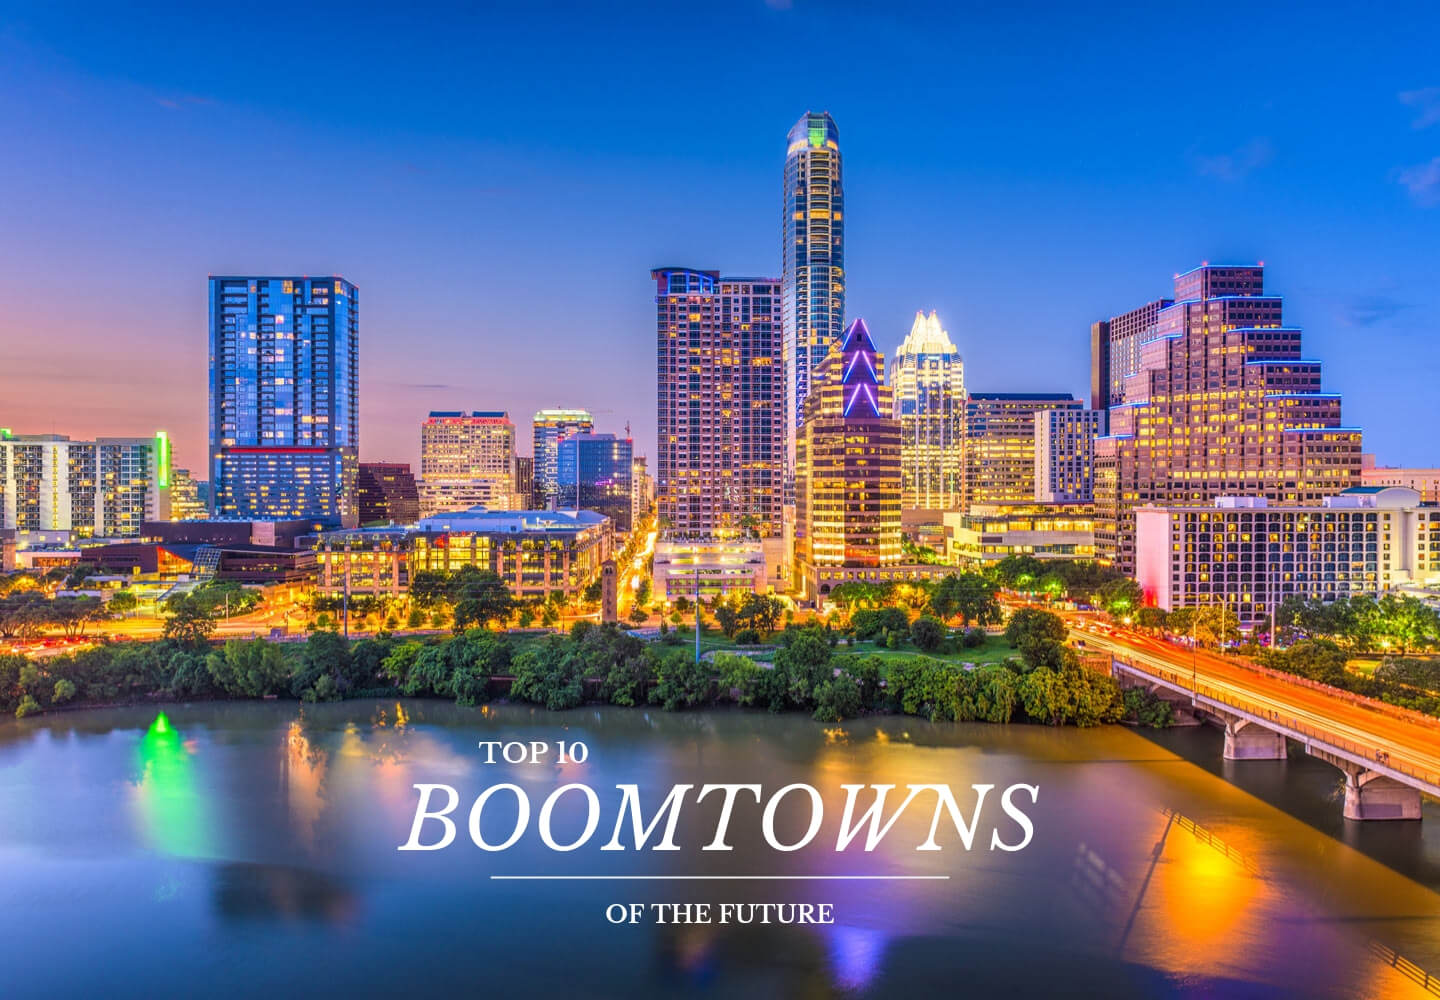 Top 10 Boomtowns